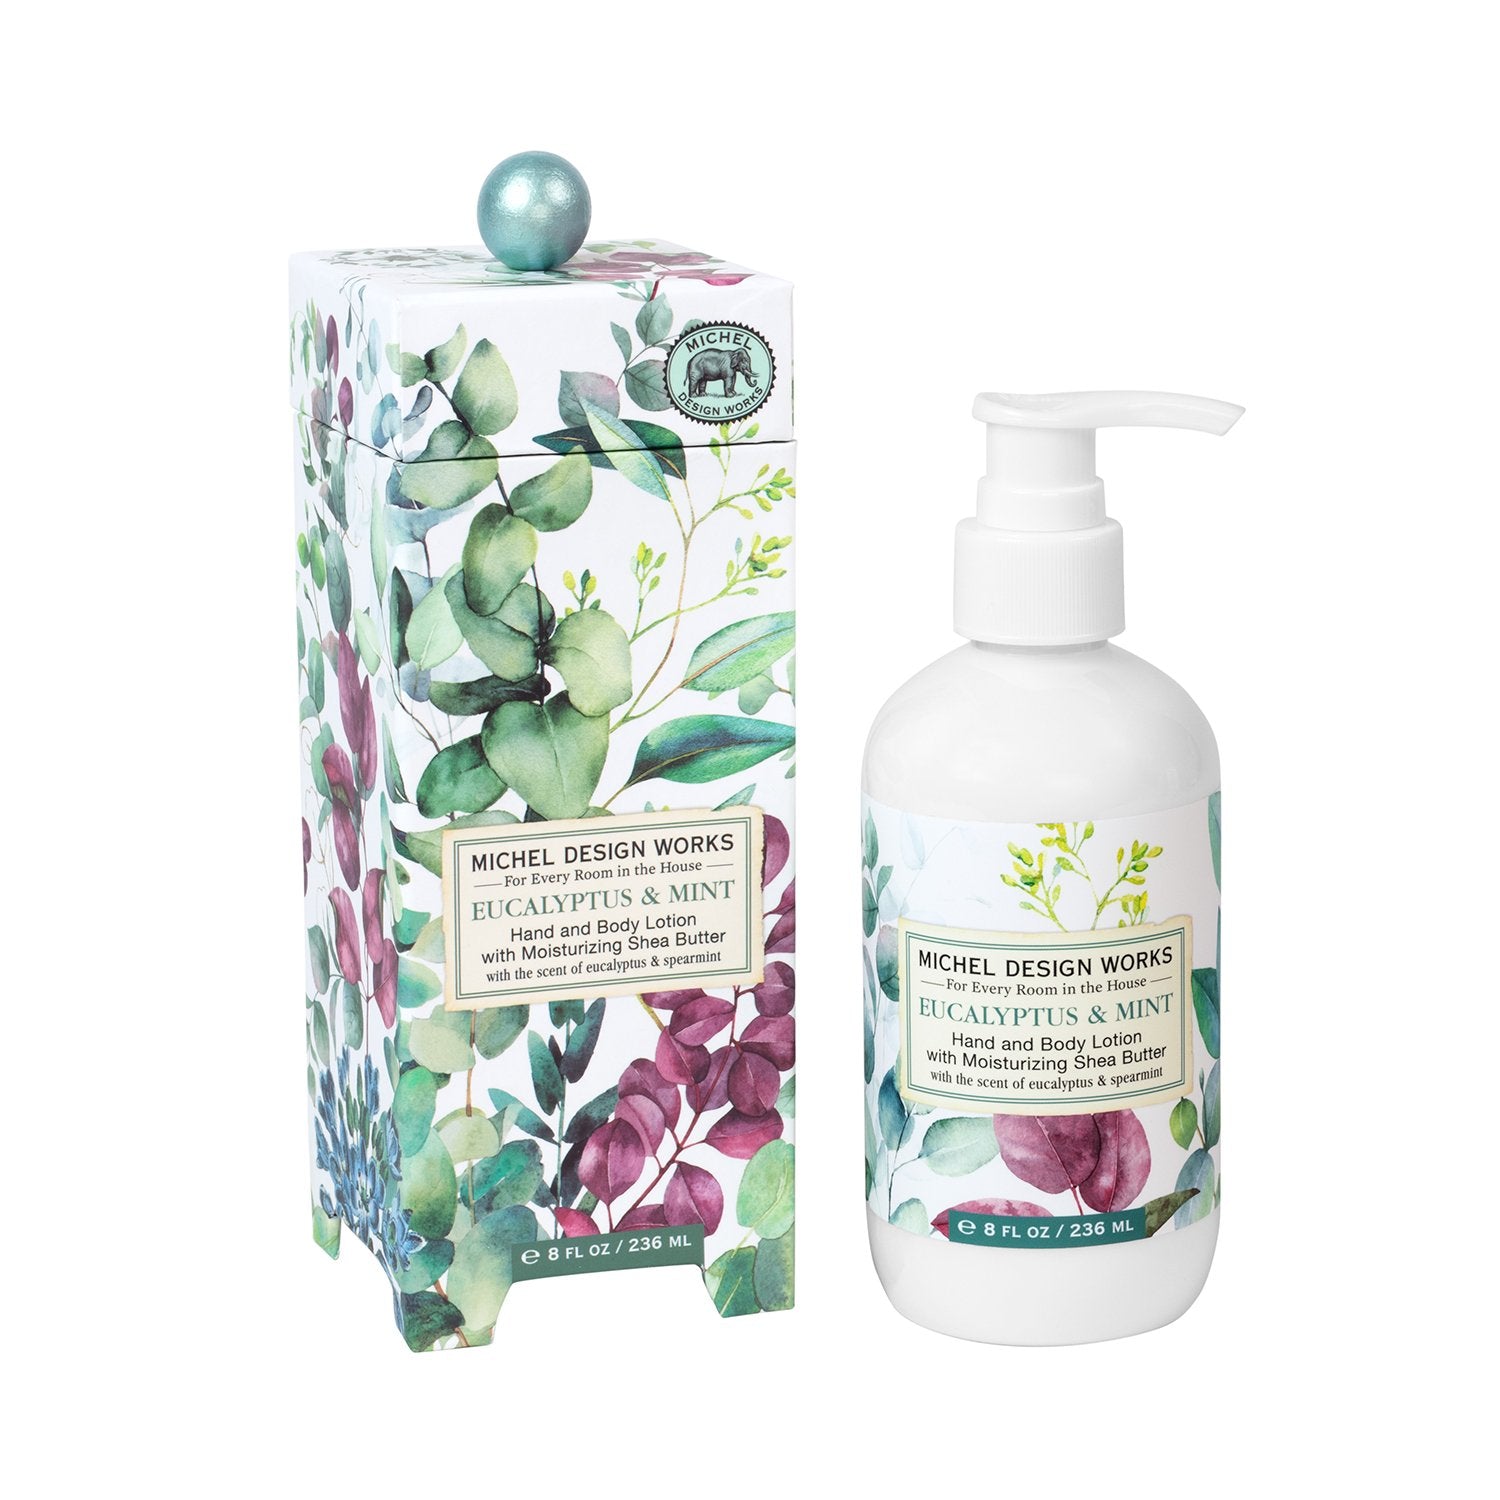 Eucalyptus & Mint Hand and Body Lotion    